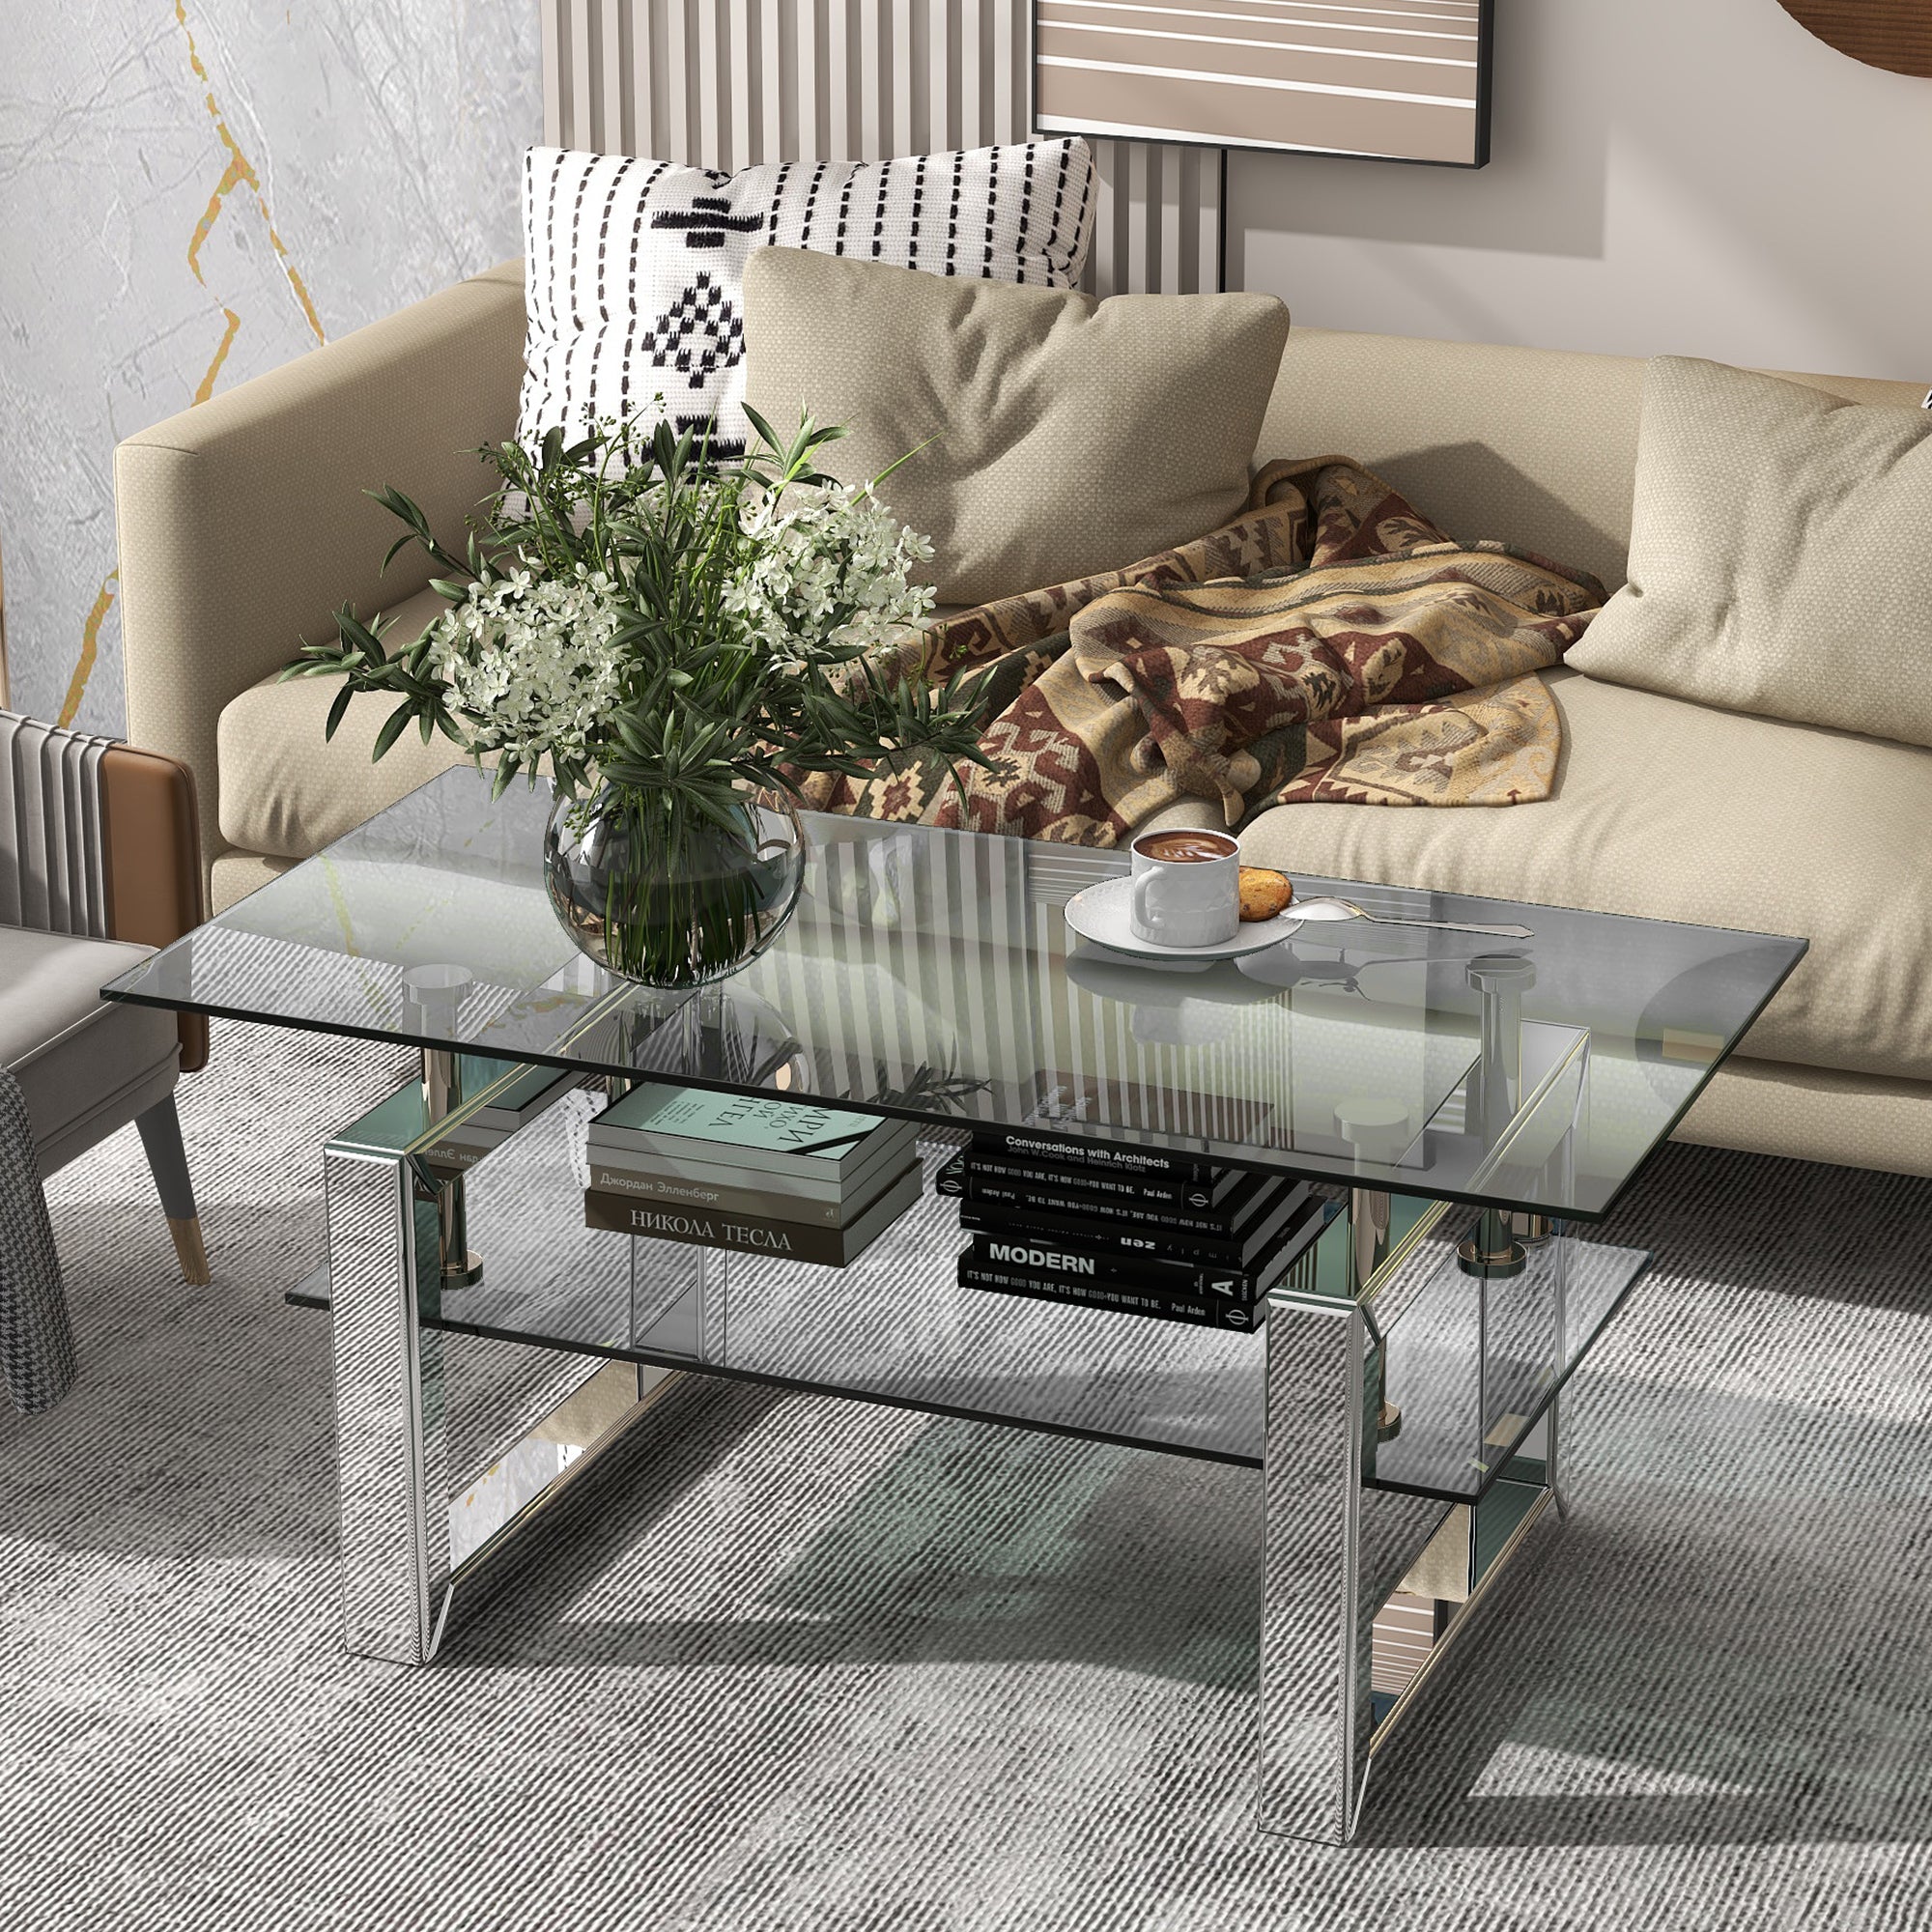 W 39.4" X D 19.7 " X H 17.7" Transparent tempered glass coffee table